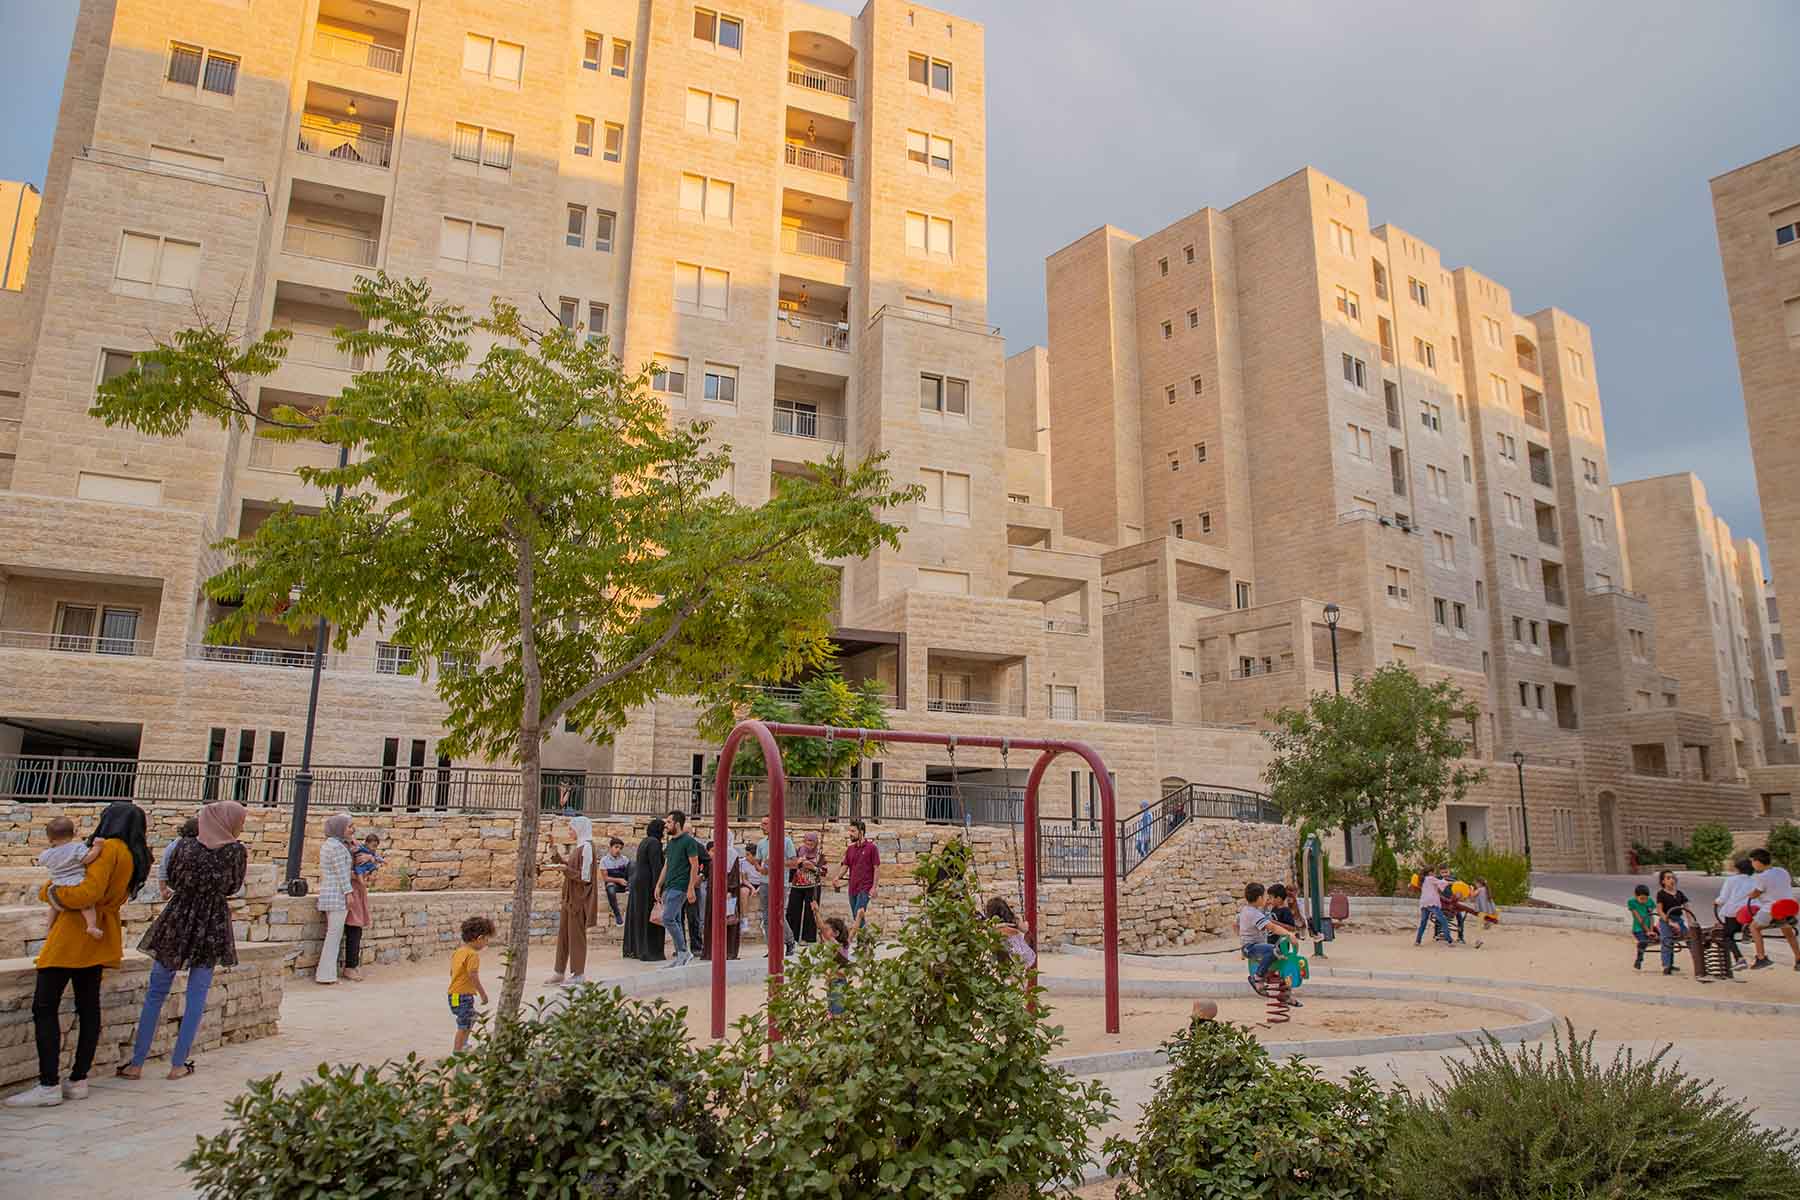 Children and families congregate in a playground with mid-rise apartment buildings in the background